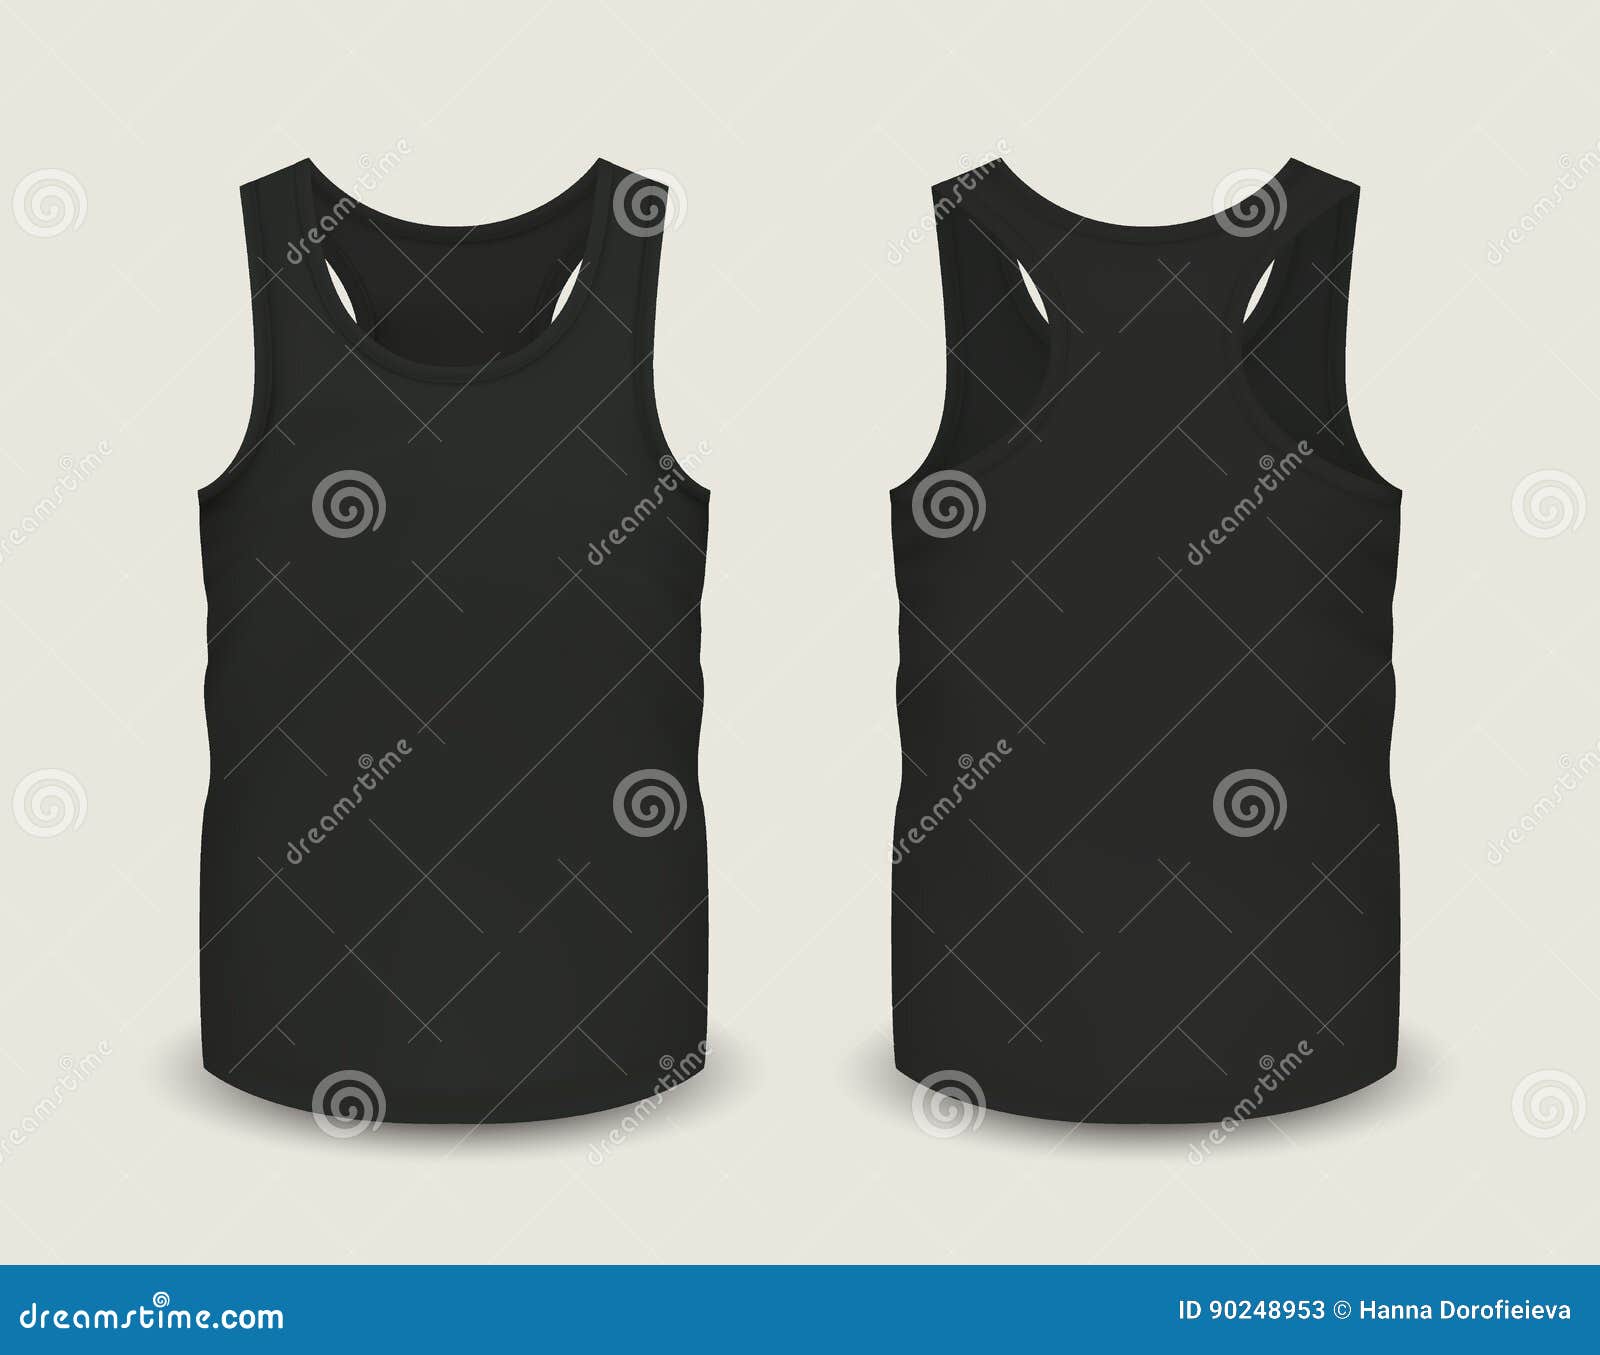 Download Men`s Black Tank Top Without Sleeves In Front And Back ...